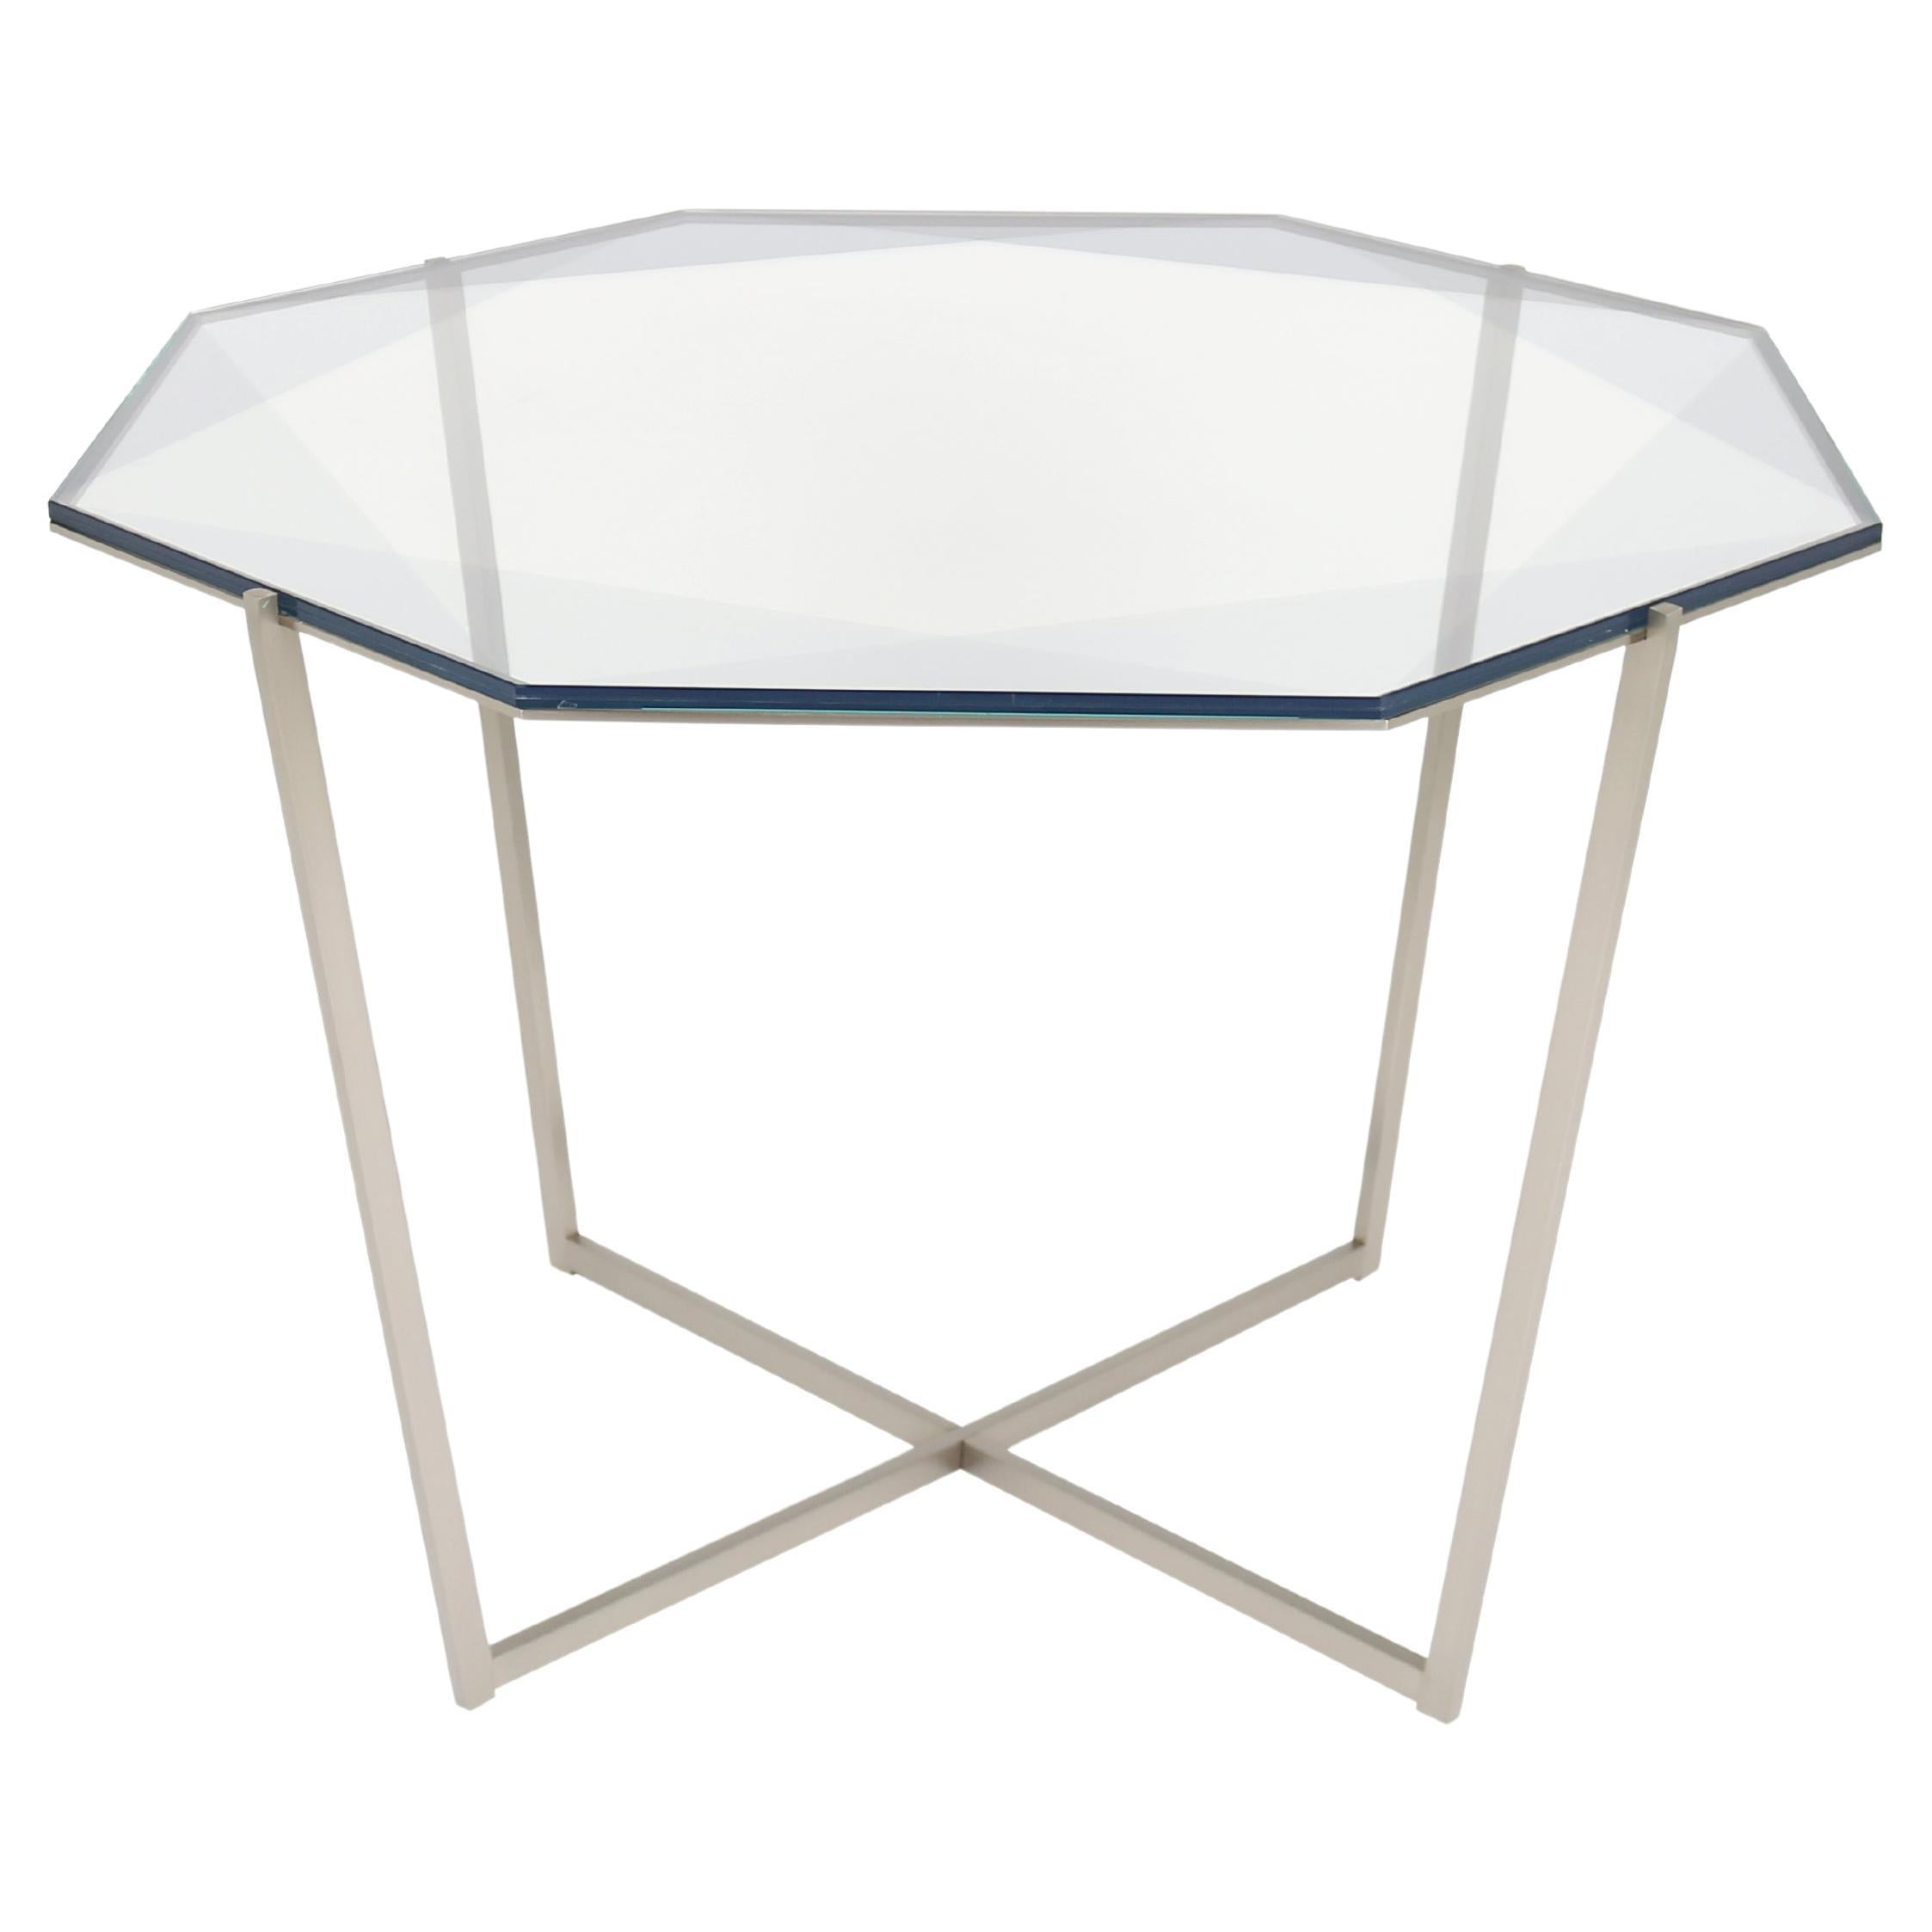 Gem Octagonal Dining Table/Entry Table-Gray Glass with Steel Base by Debra Folz For Sale